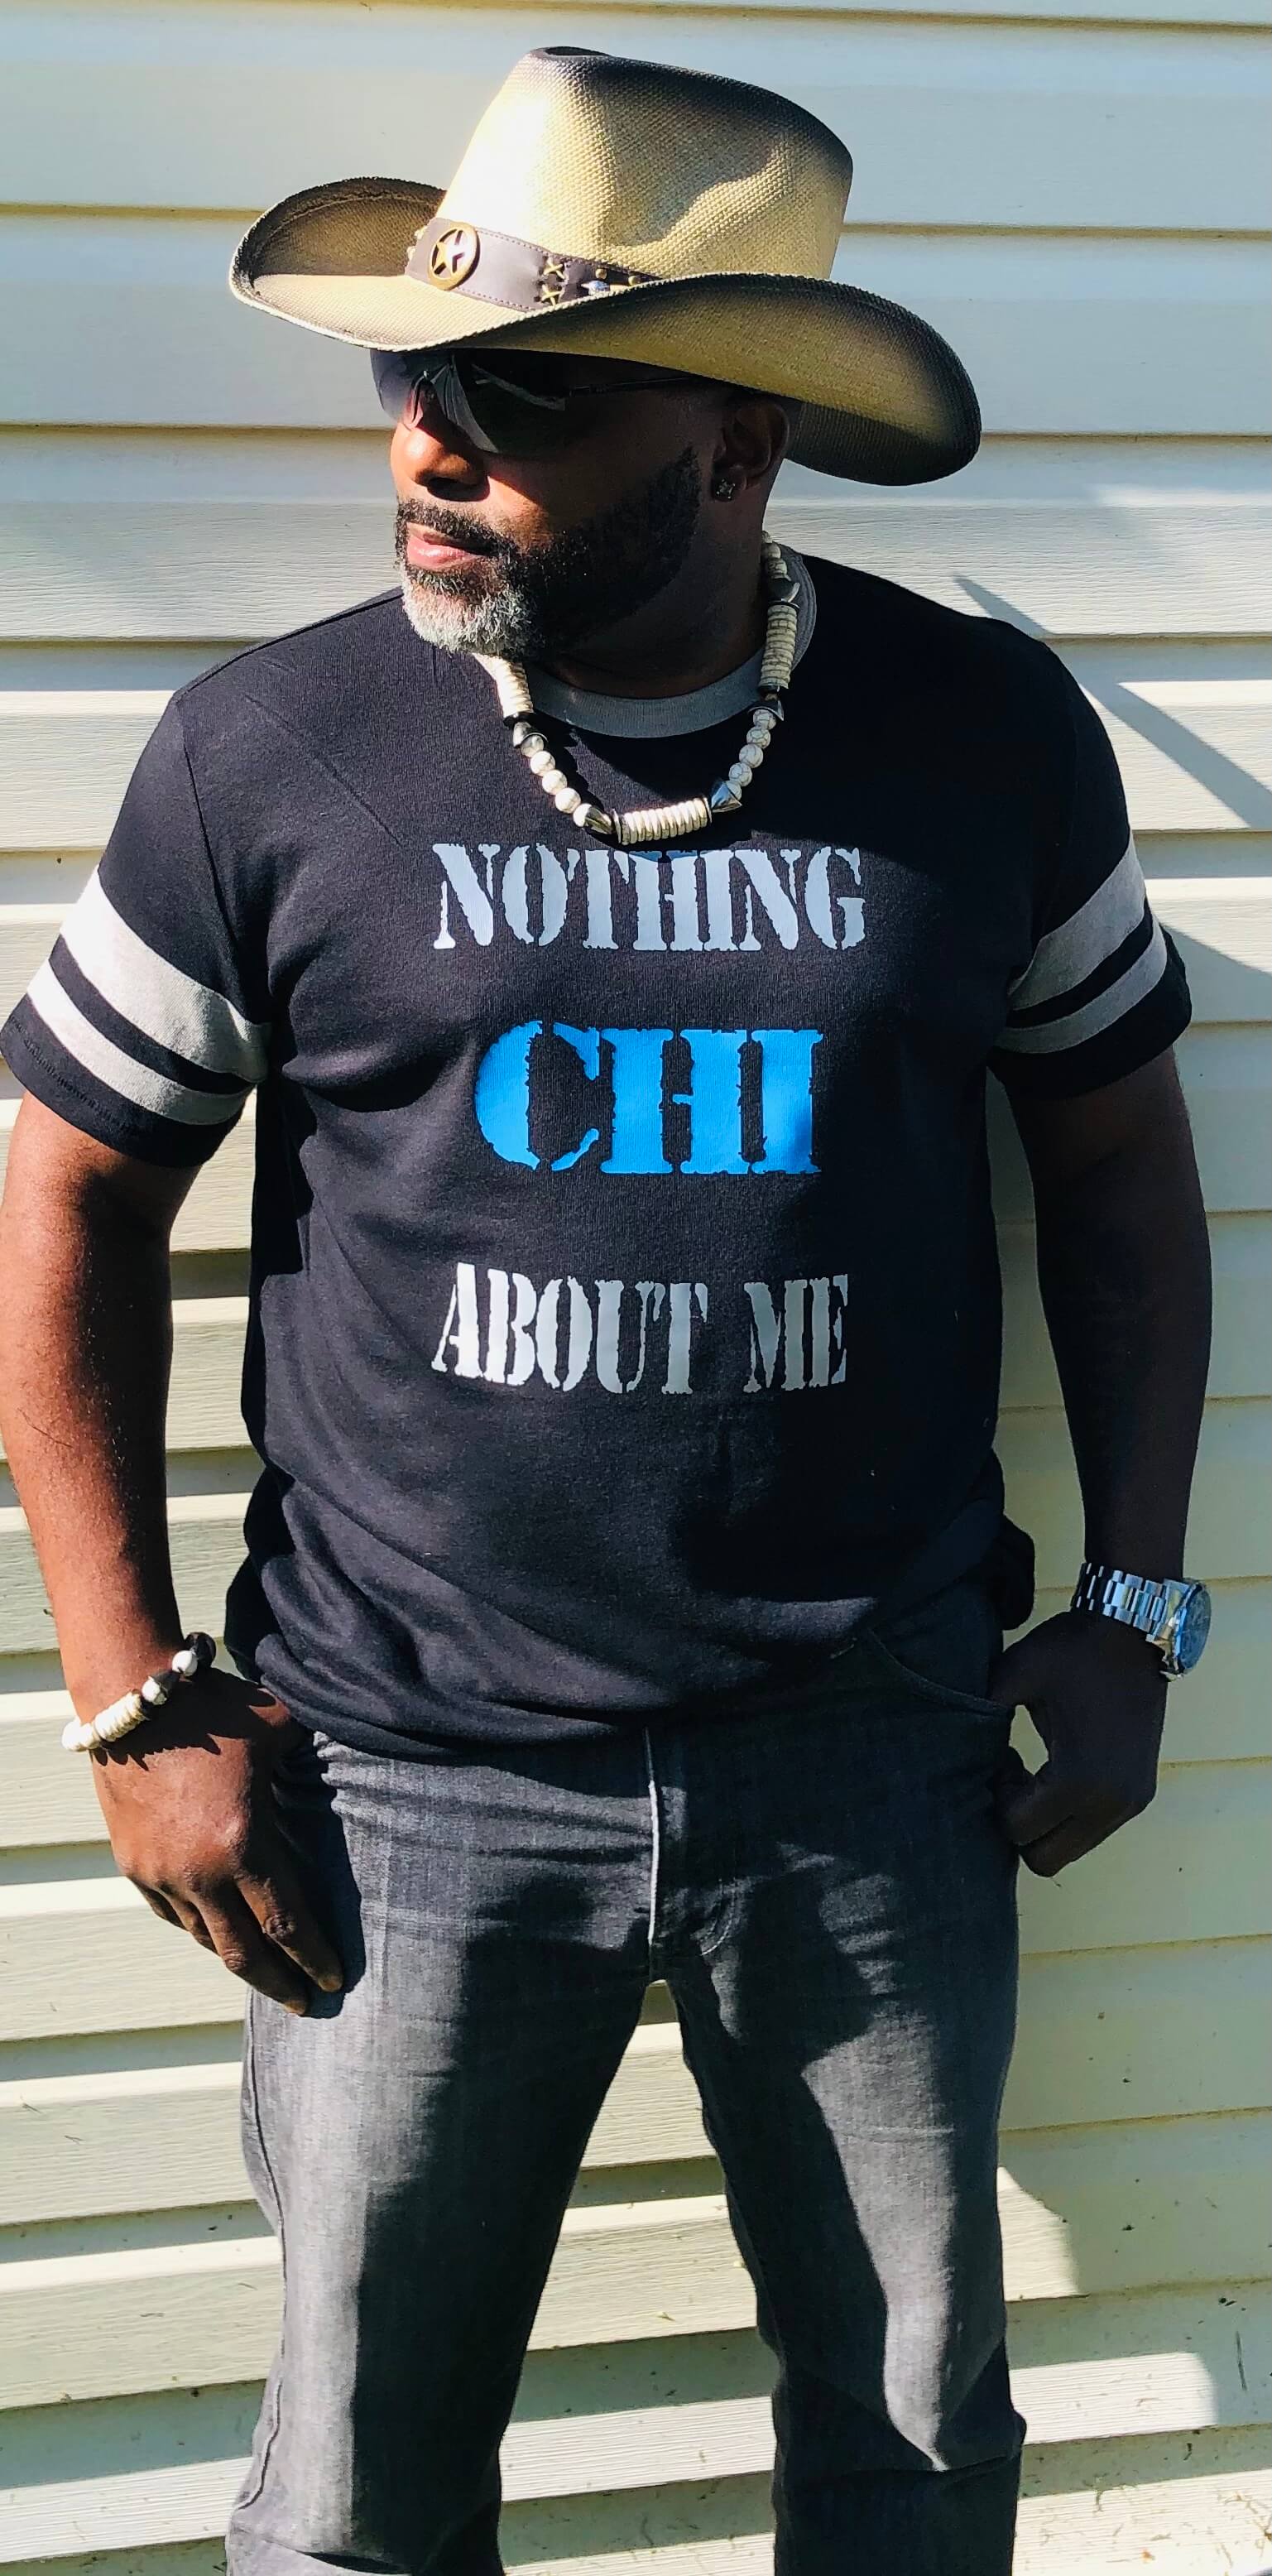 NOTHING CHI ABOUT ME (MEN)